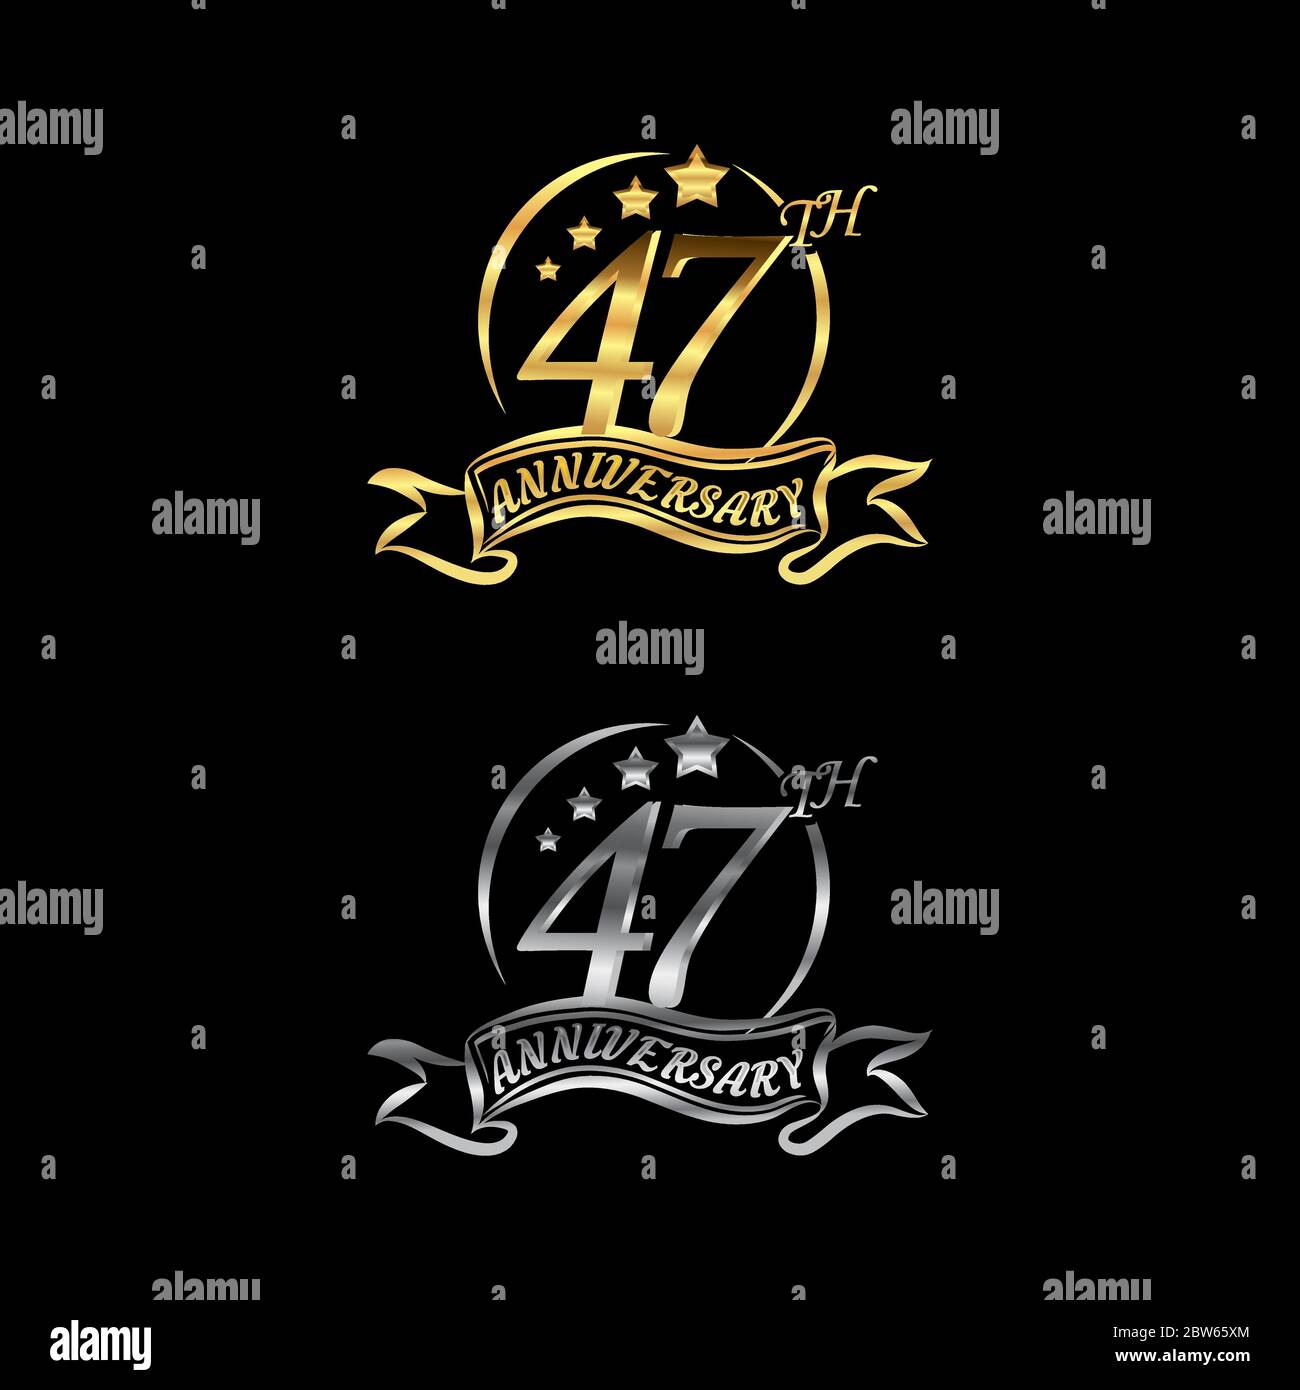 Celebrating the 47th anniversary logo,star shape, with gold and silver rings and gradation ribbons isolated on a black background.EPS 10 Stock Vector